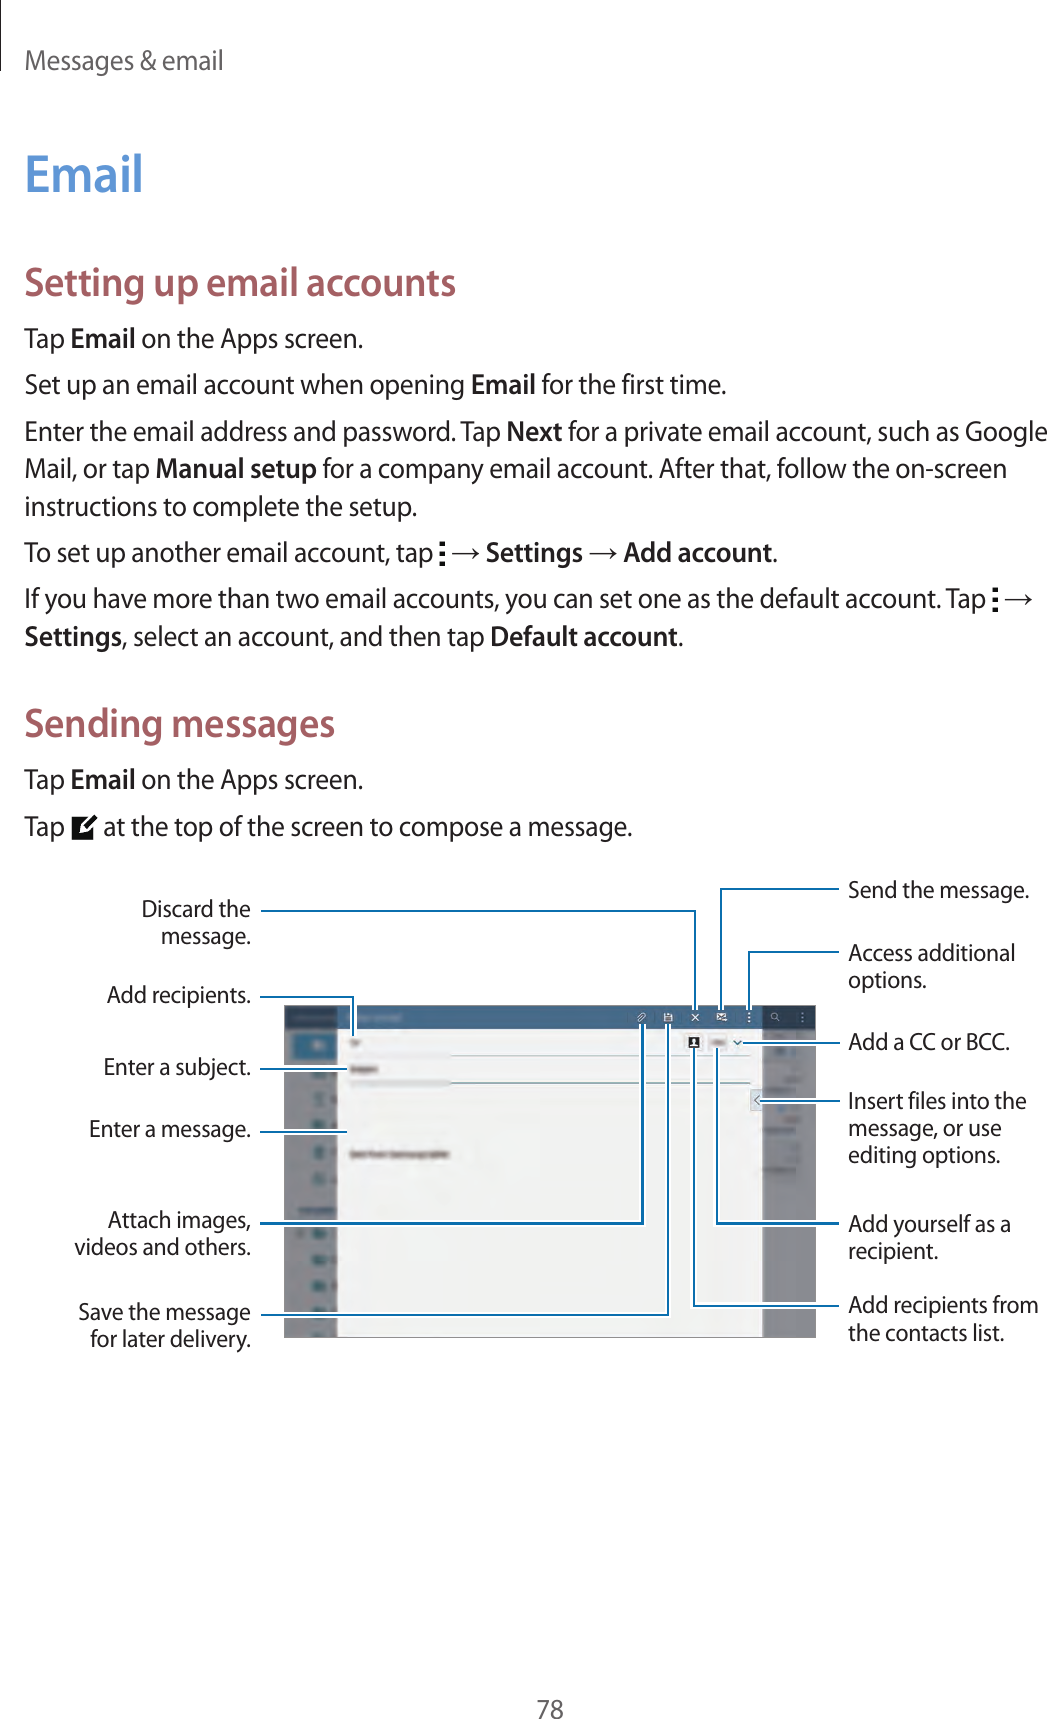 Messages &amp; email78EmailSetting up email accountsTap Email on the Apps screen.Set up an email account when opening Email for the first time.Enter the email address and password. Tap Next for a private email account, such as Google Mail, or tap Manual setup for a company email account. After that, follow the on-screen instructions to complete the setup.To set up another email account, tap   → Settings → Add account.If you have more than two email accounts, you can set one as the default account. Tap   → Settings, select an account, and then tap Default account.Sending messagesTap Email on the Apps screen.Tap   at the top of the screen to compose a message.Enter a message.Insert files into the message, or use editing options.Add a CC or BCC.Add yourself as a recipient.Add recipients.Discard the message.Attach images, videos and others.Save the message for later delivery.Access additional options.Send the message.Add recipients from the contacts list.Enter a subject.